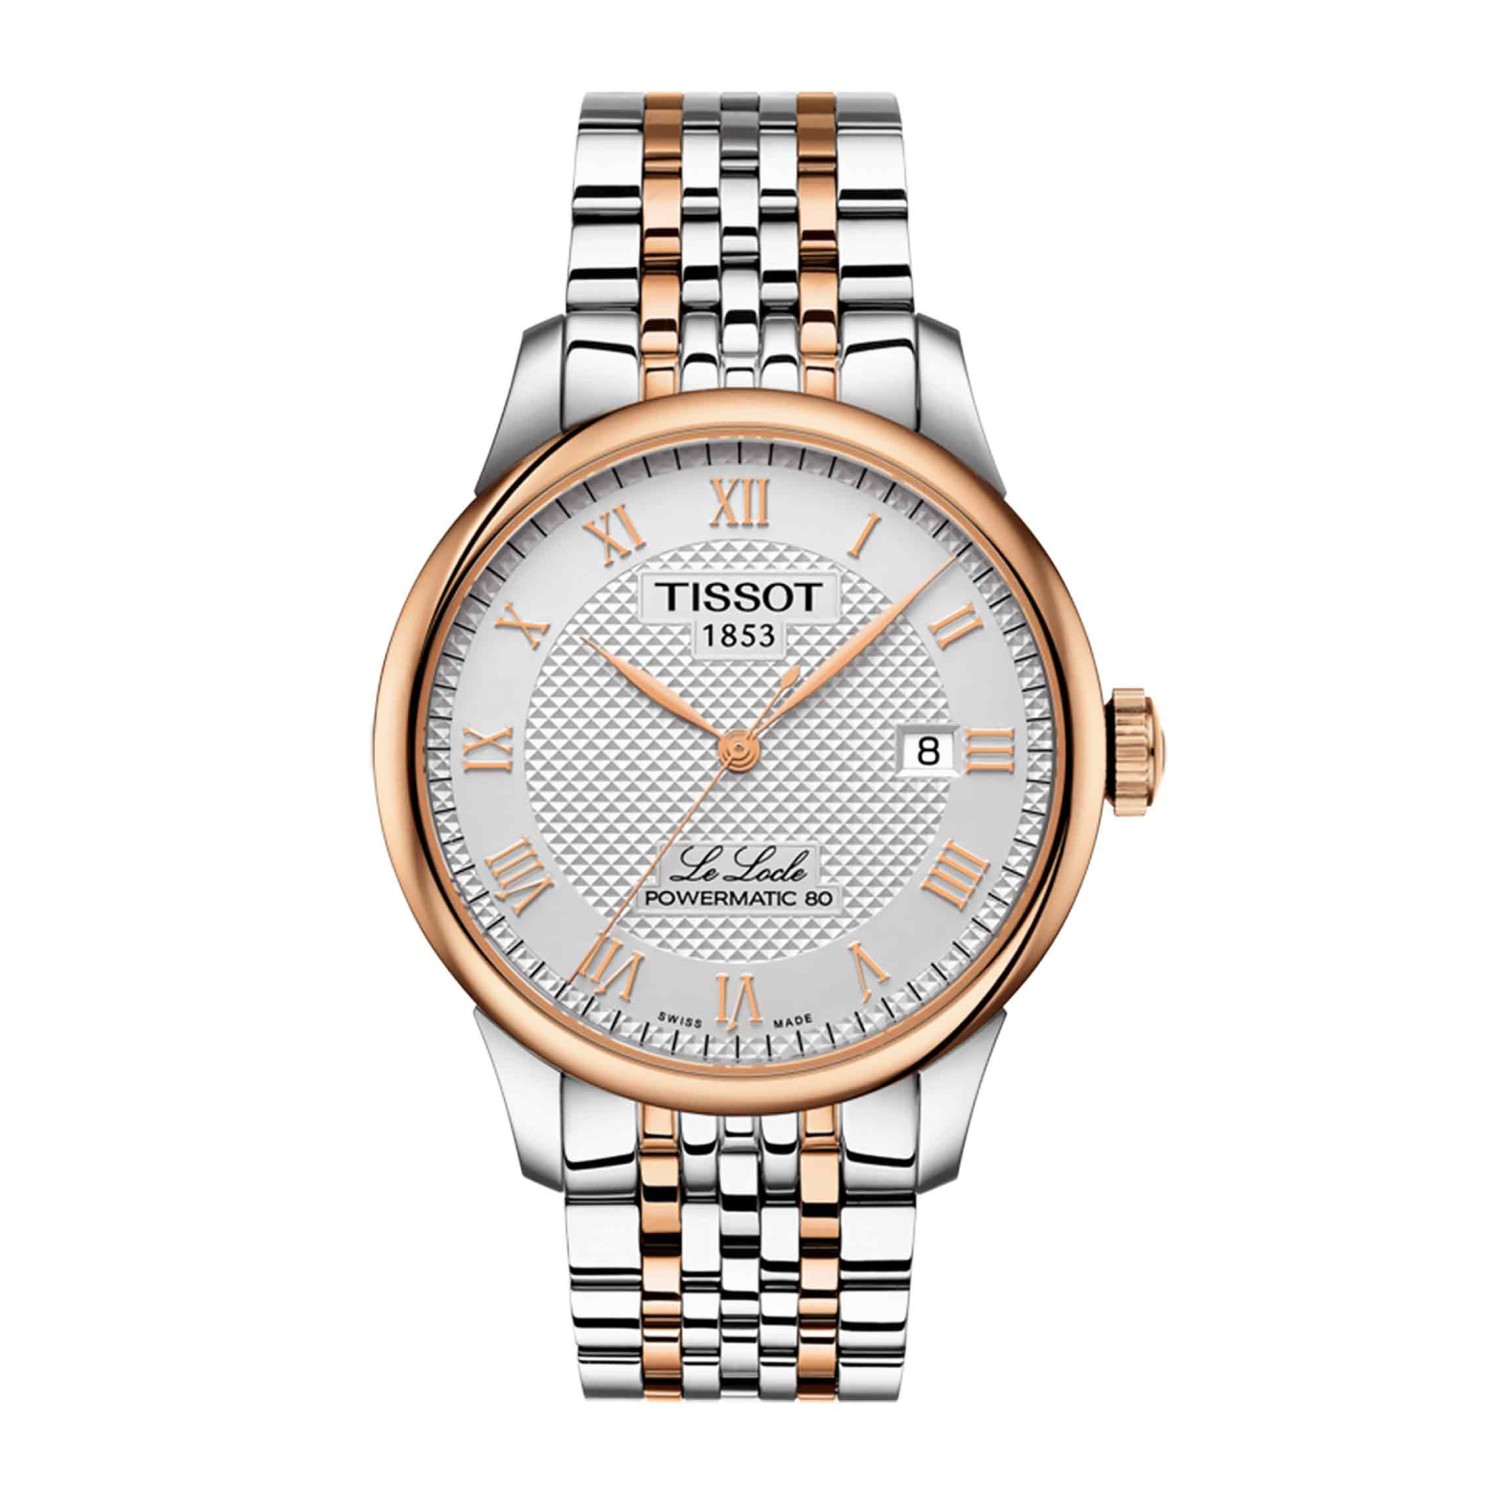 TISSOT Le Locle Powermatic 80 T006.407.22.033.00. The name Le Locle seems to be a reliable ingredient of success. As well as being the name of Tissot's home and heritage, nestled in the Swiss Jura Mountains, it is the name of a hugely popular automatic wa